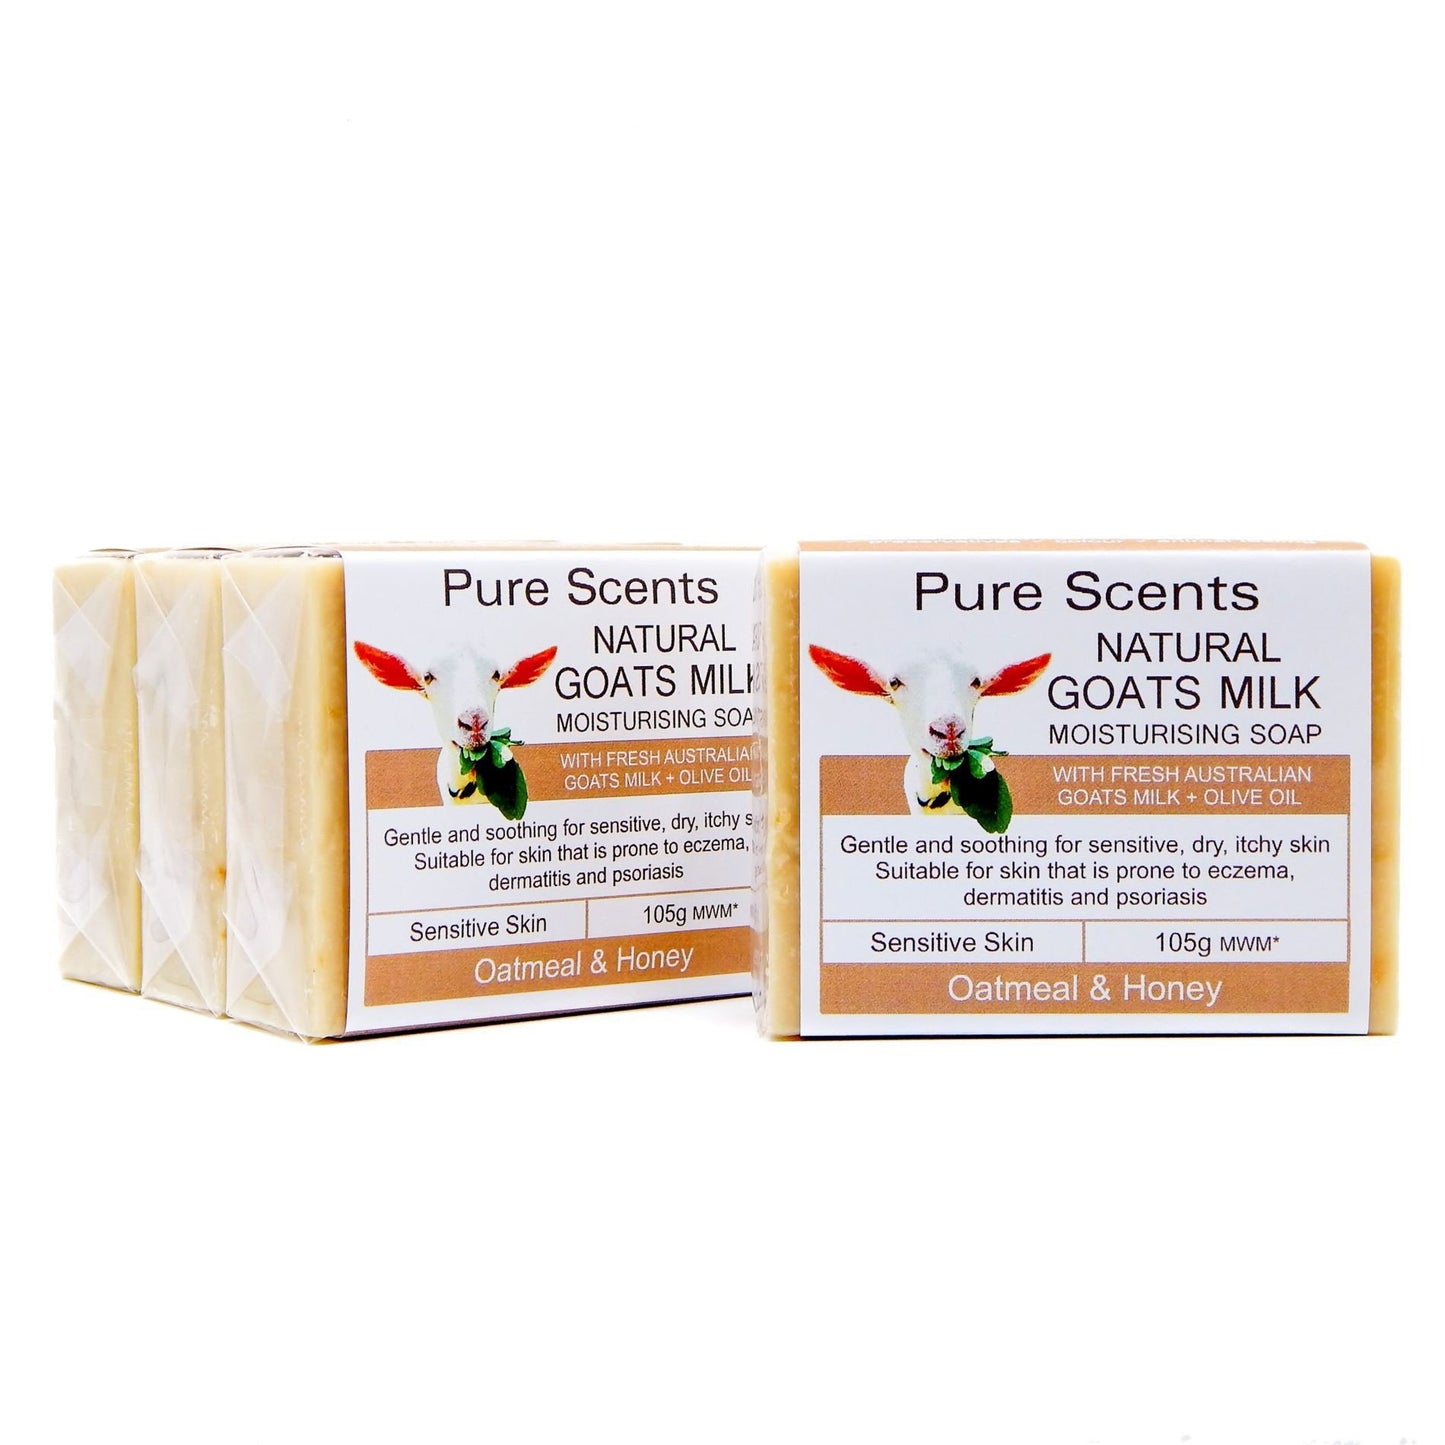 Goat Milk Soap - Oatmeal & Honey Value Pack 4 x 110g - Pure Scents